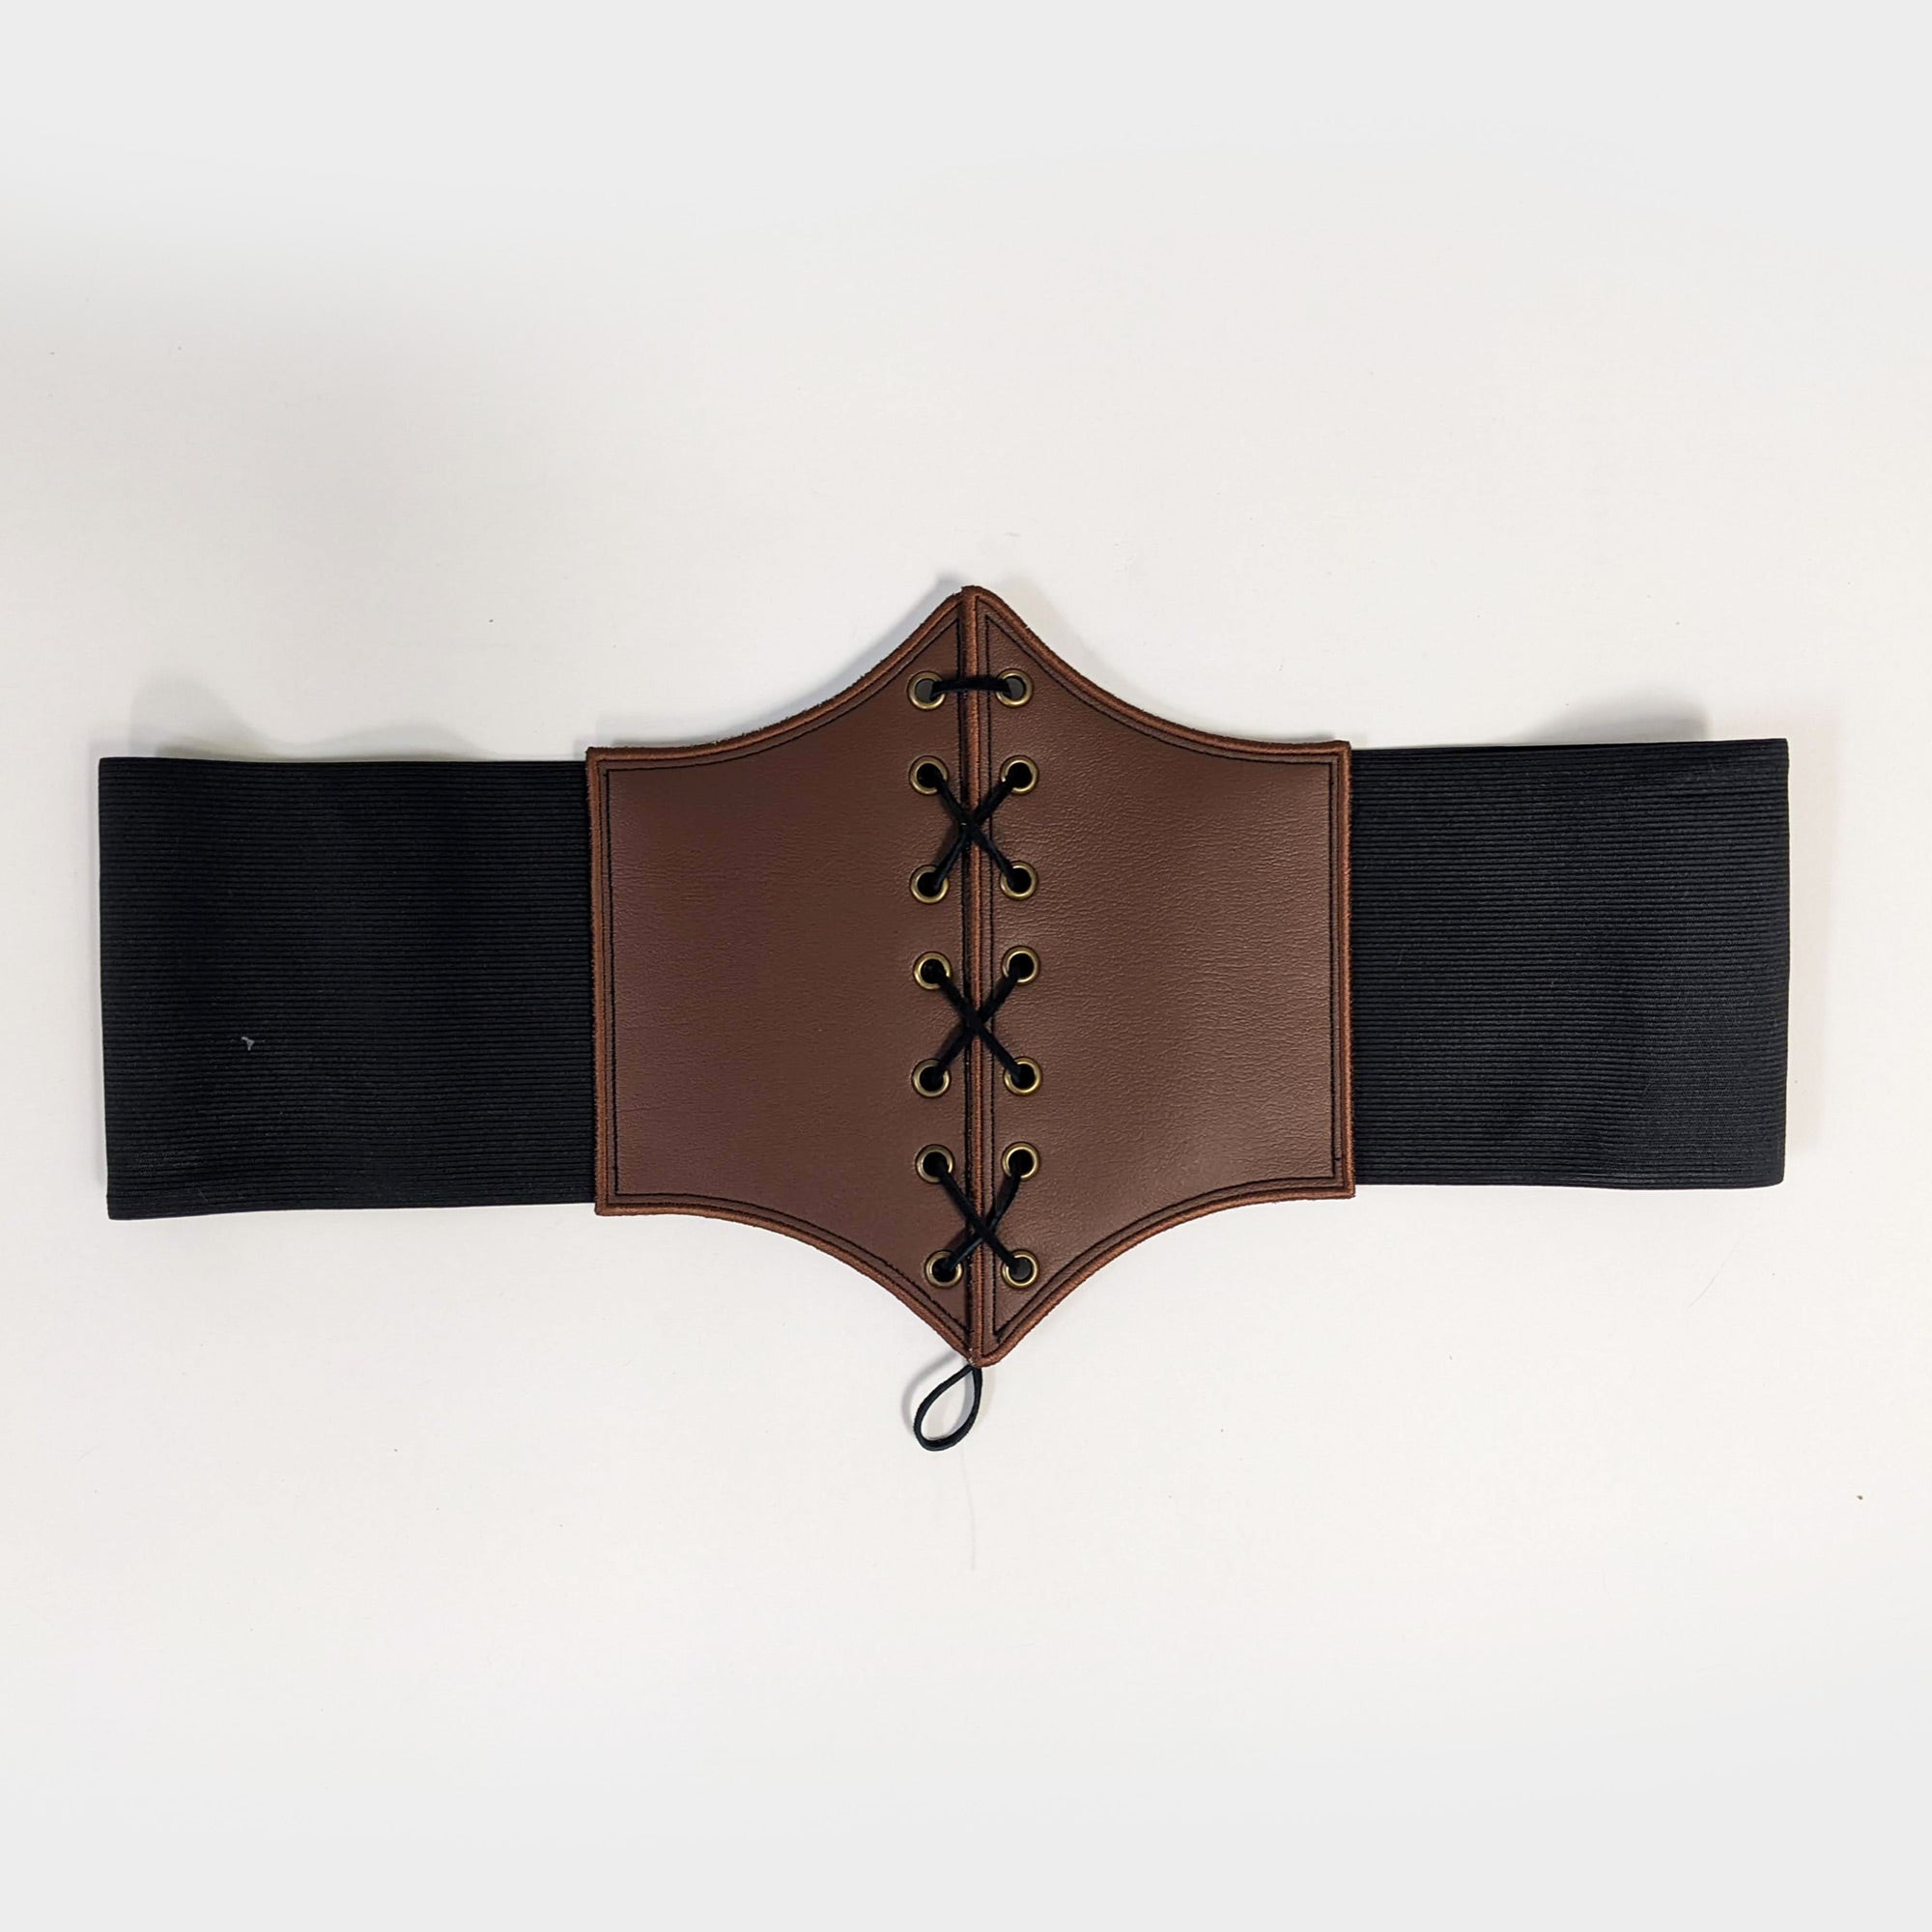 Just finished this corset-belt : r/Leathercraft